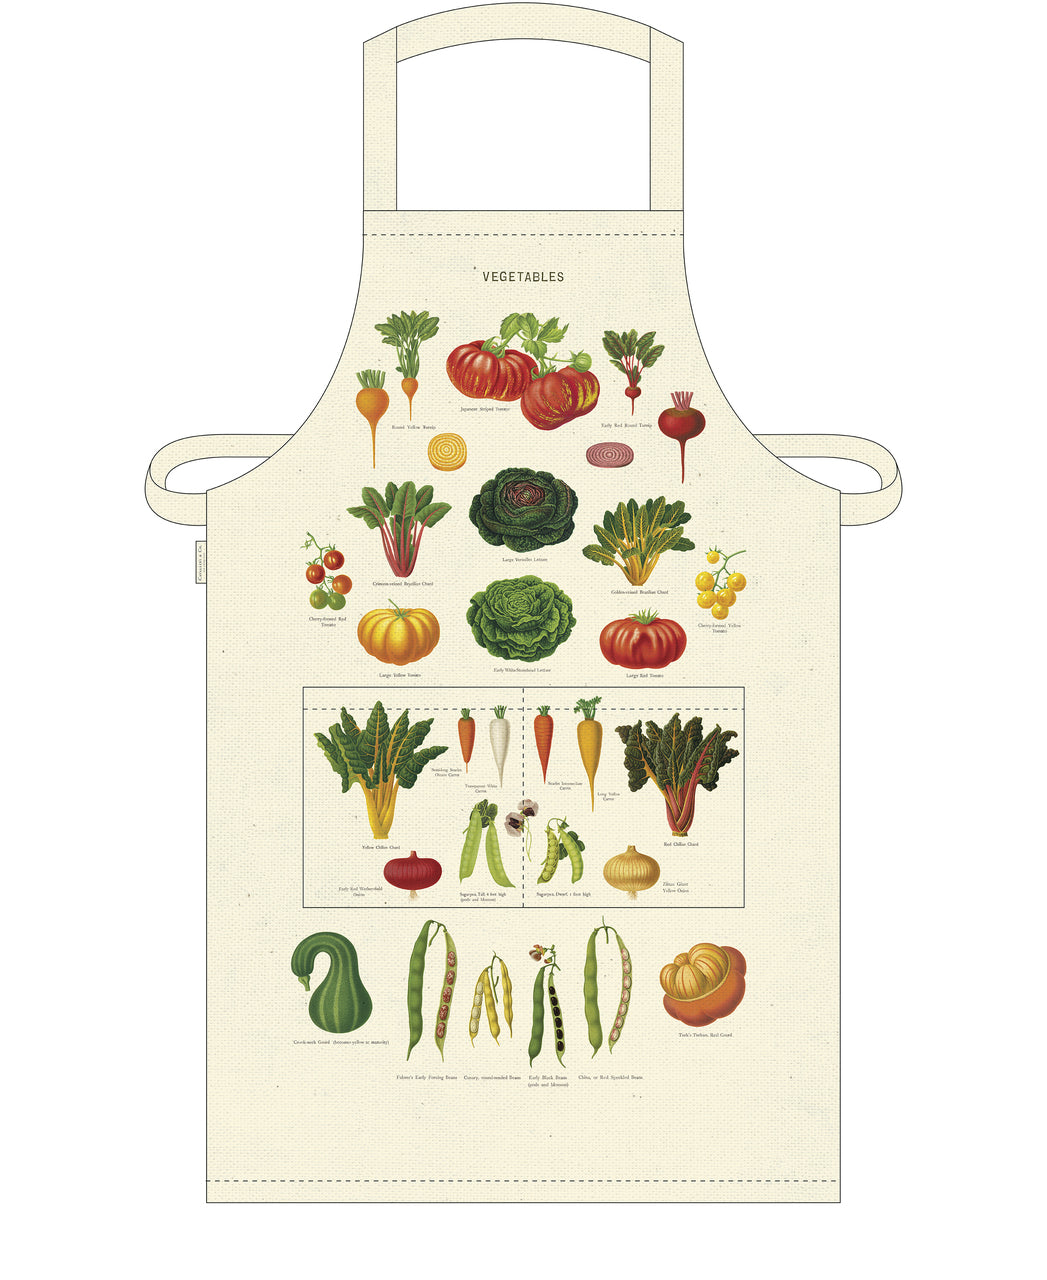 Who doesn't love Cavallini's selection of vintage imagery? The Vegetable Cotton Apron features a selection of colorful vintage images of garden vegetables, each labeled by name.